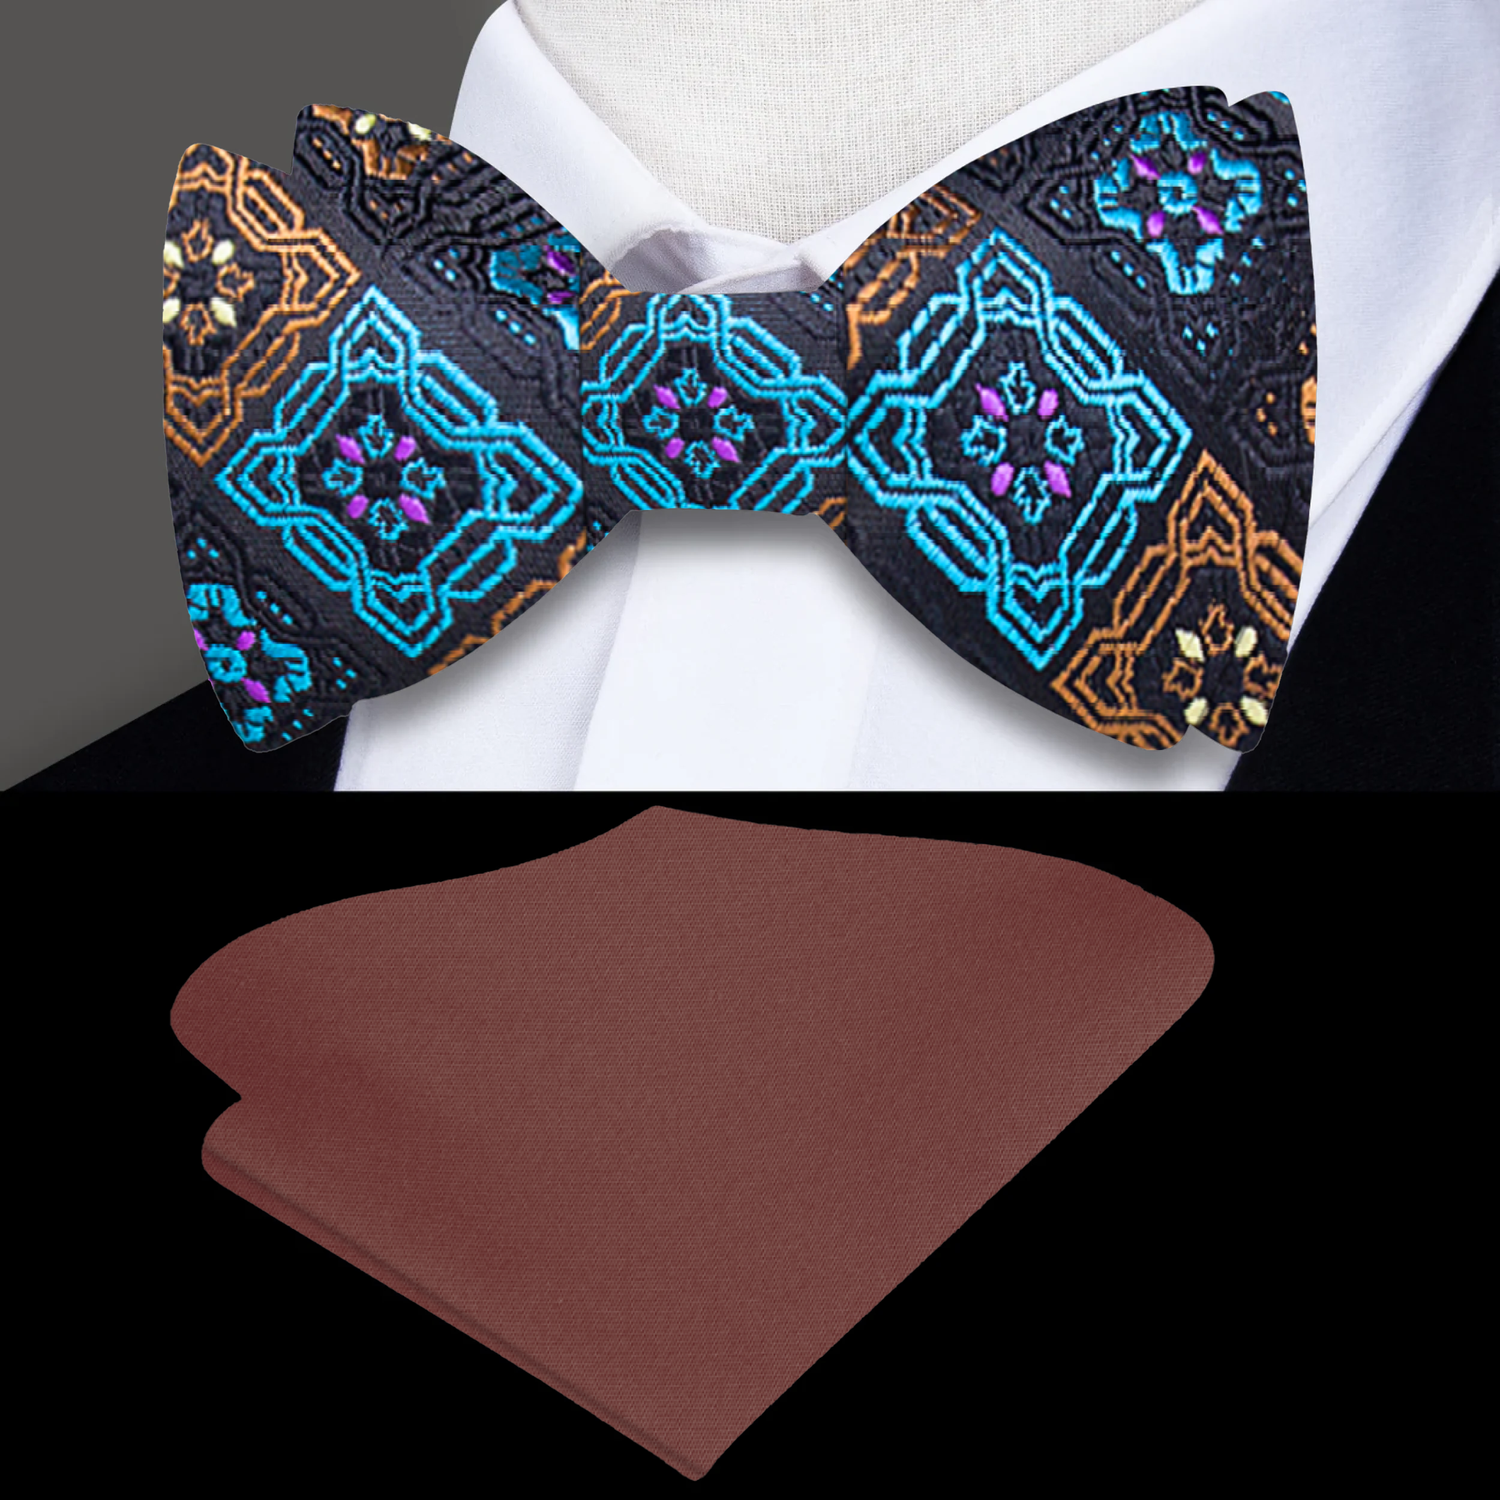 Black, Light Blue, Brown Geometric Bow Tie and Brown Square